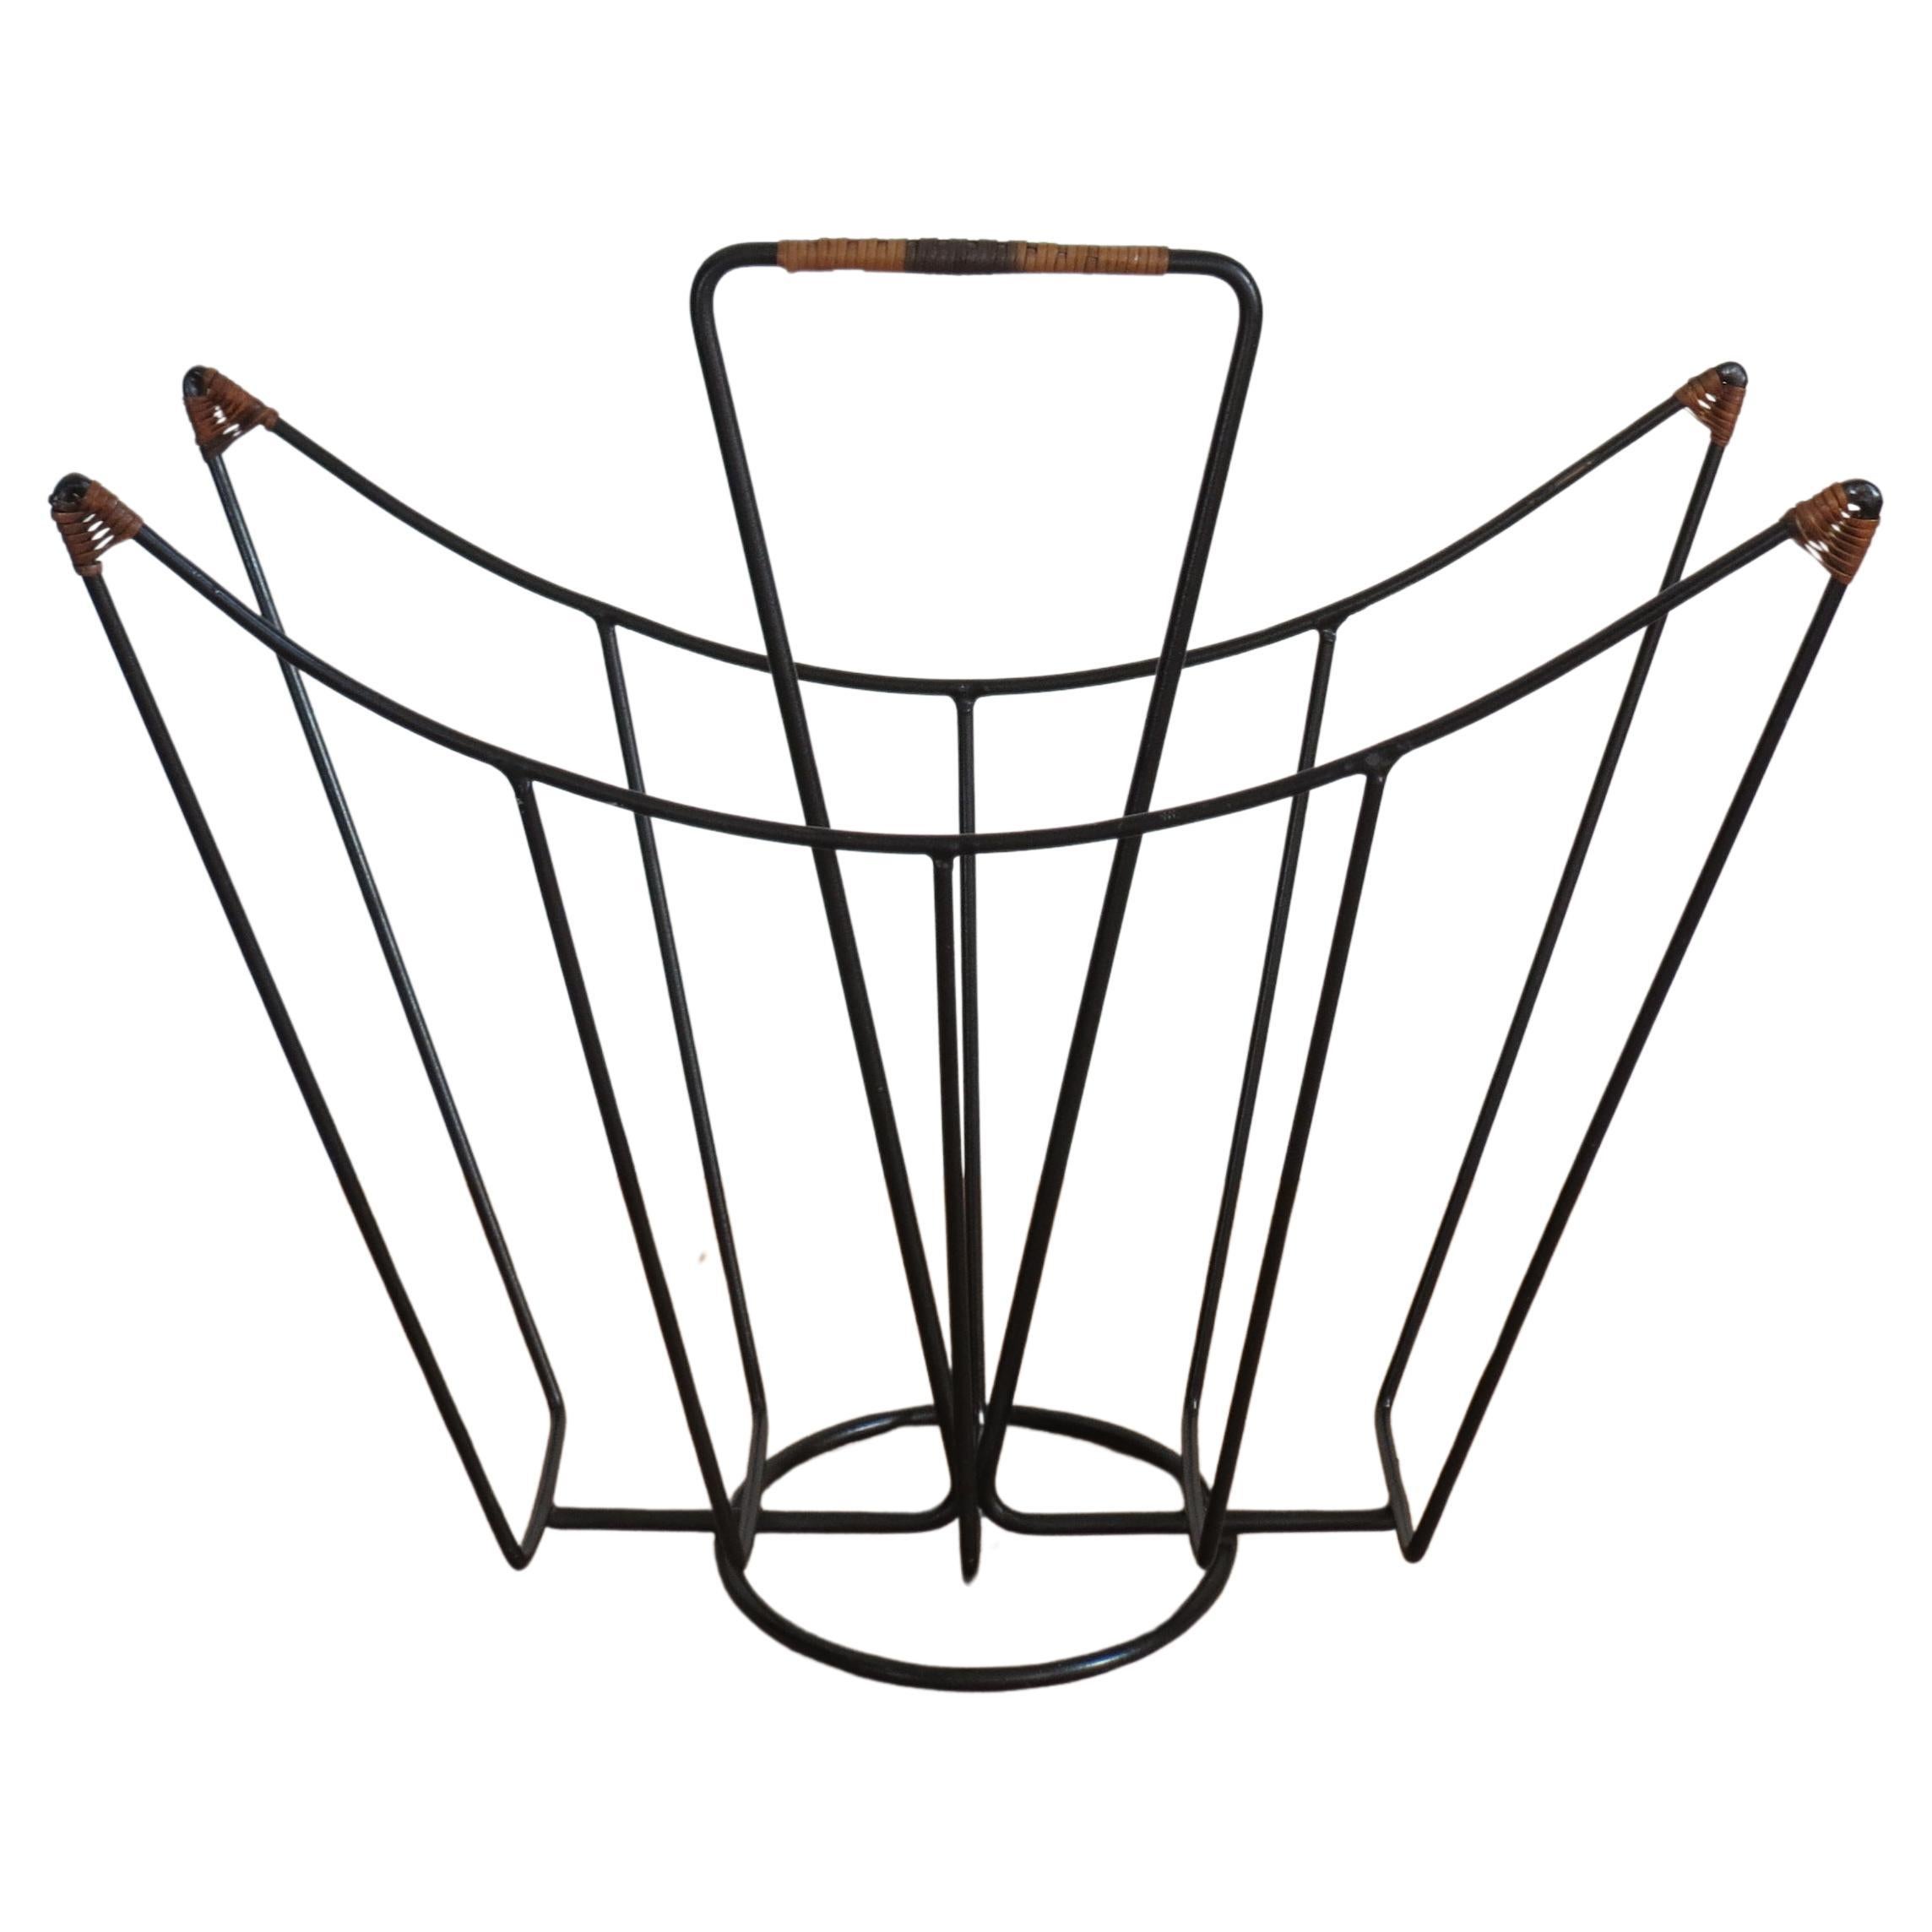 1960s Steel and Rattan Magazine Rack By Desmond Sawyer  For Sale